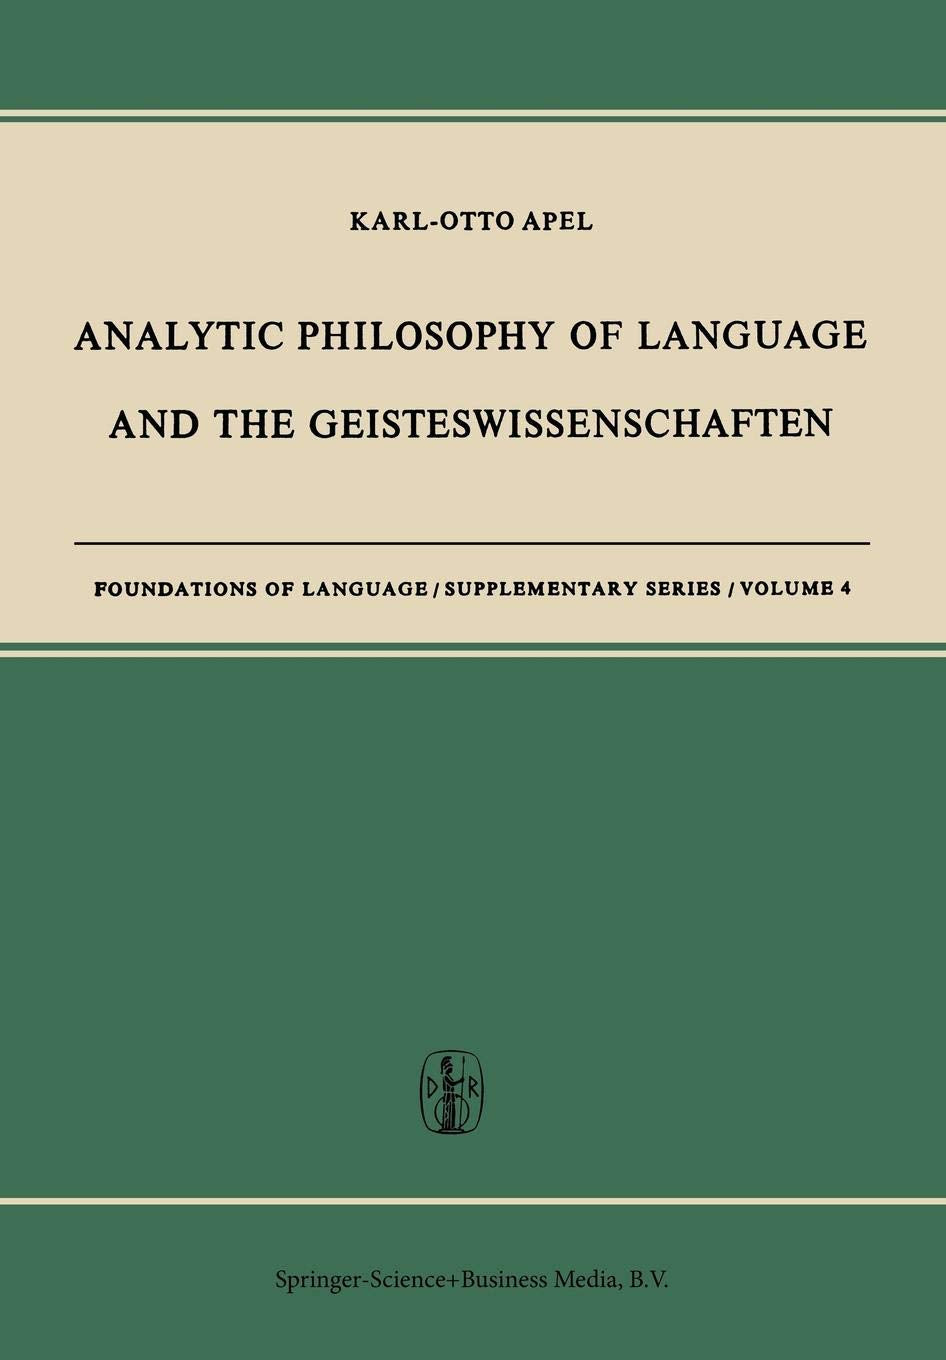 Analytic Philosophy of Language and the Geisteswissenschaften (Foundations of Language Supplementary Series)